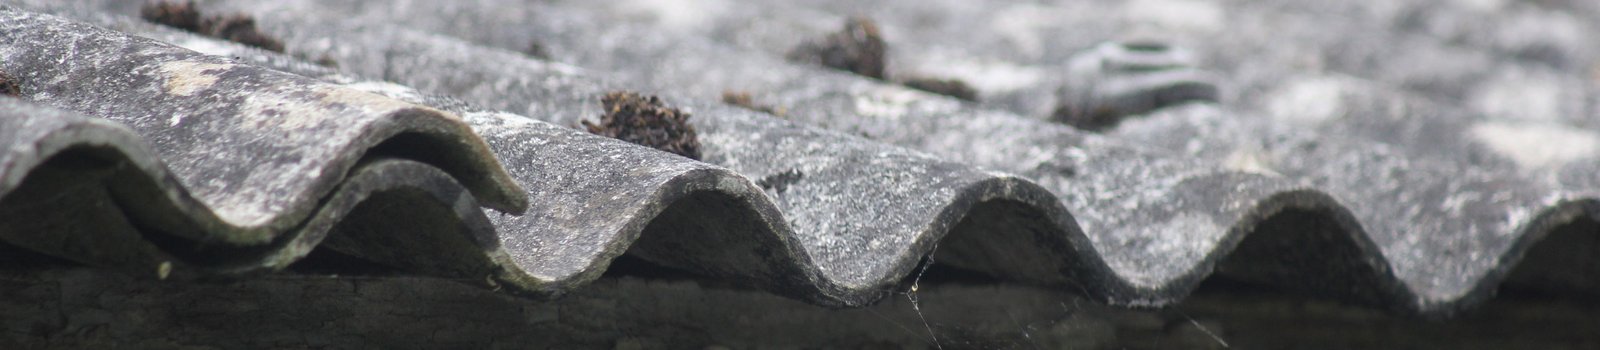 Asbestos cement roof profile Courtesy of M4 Property Solutions.jpg